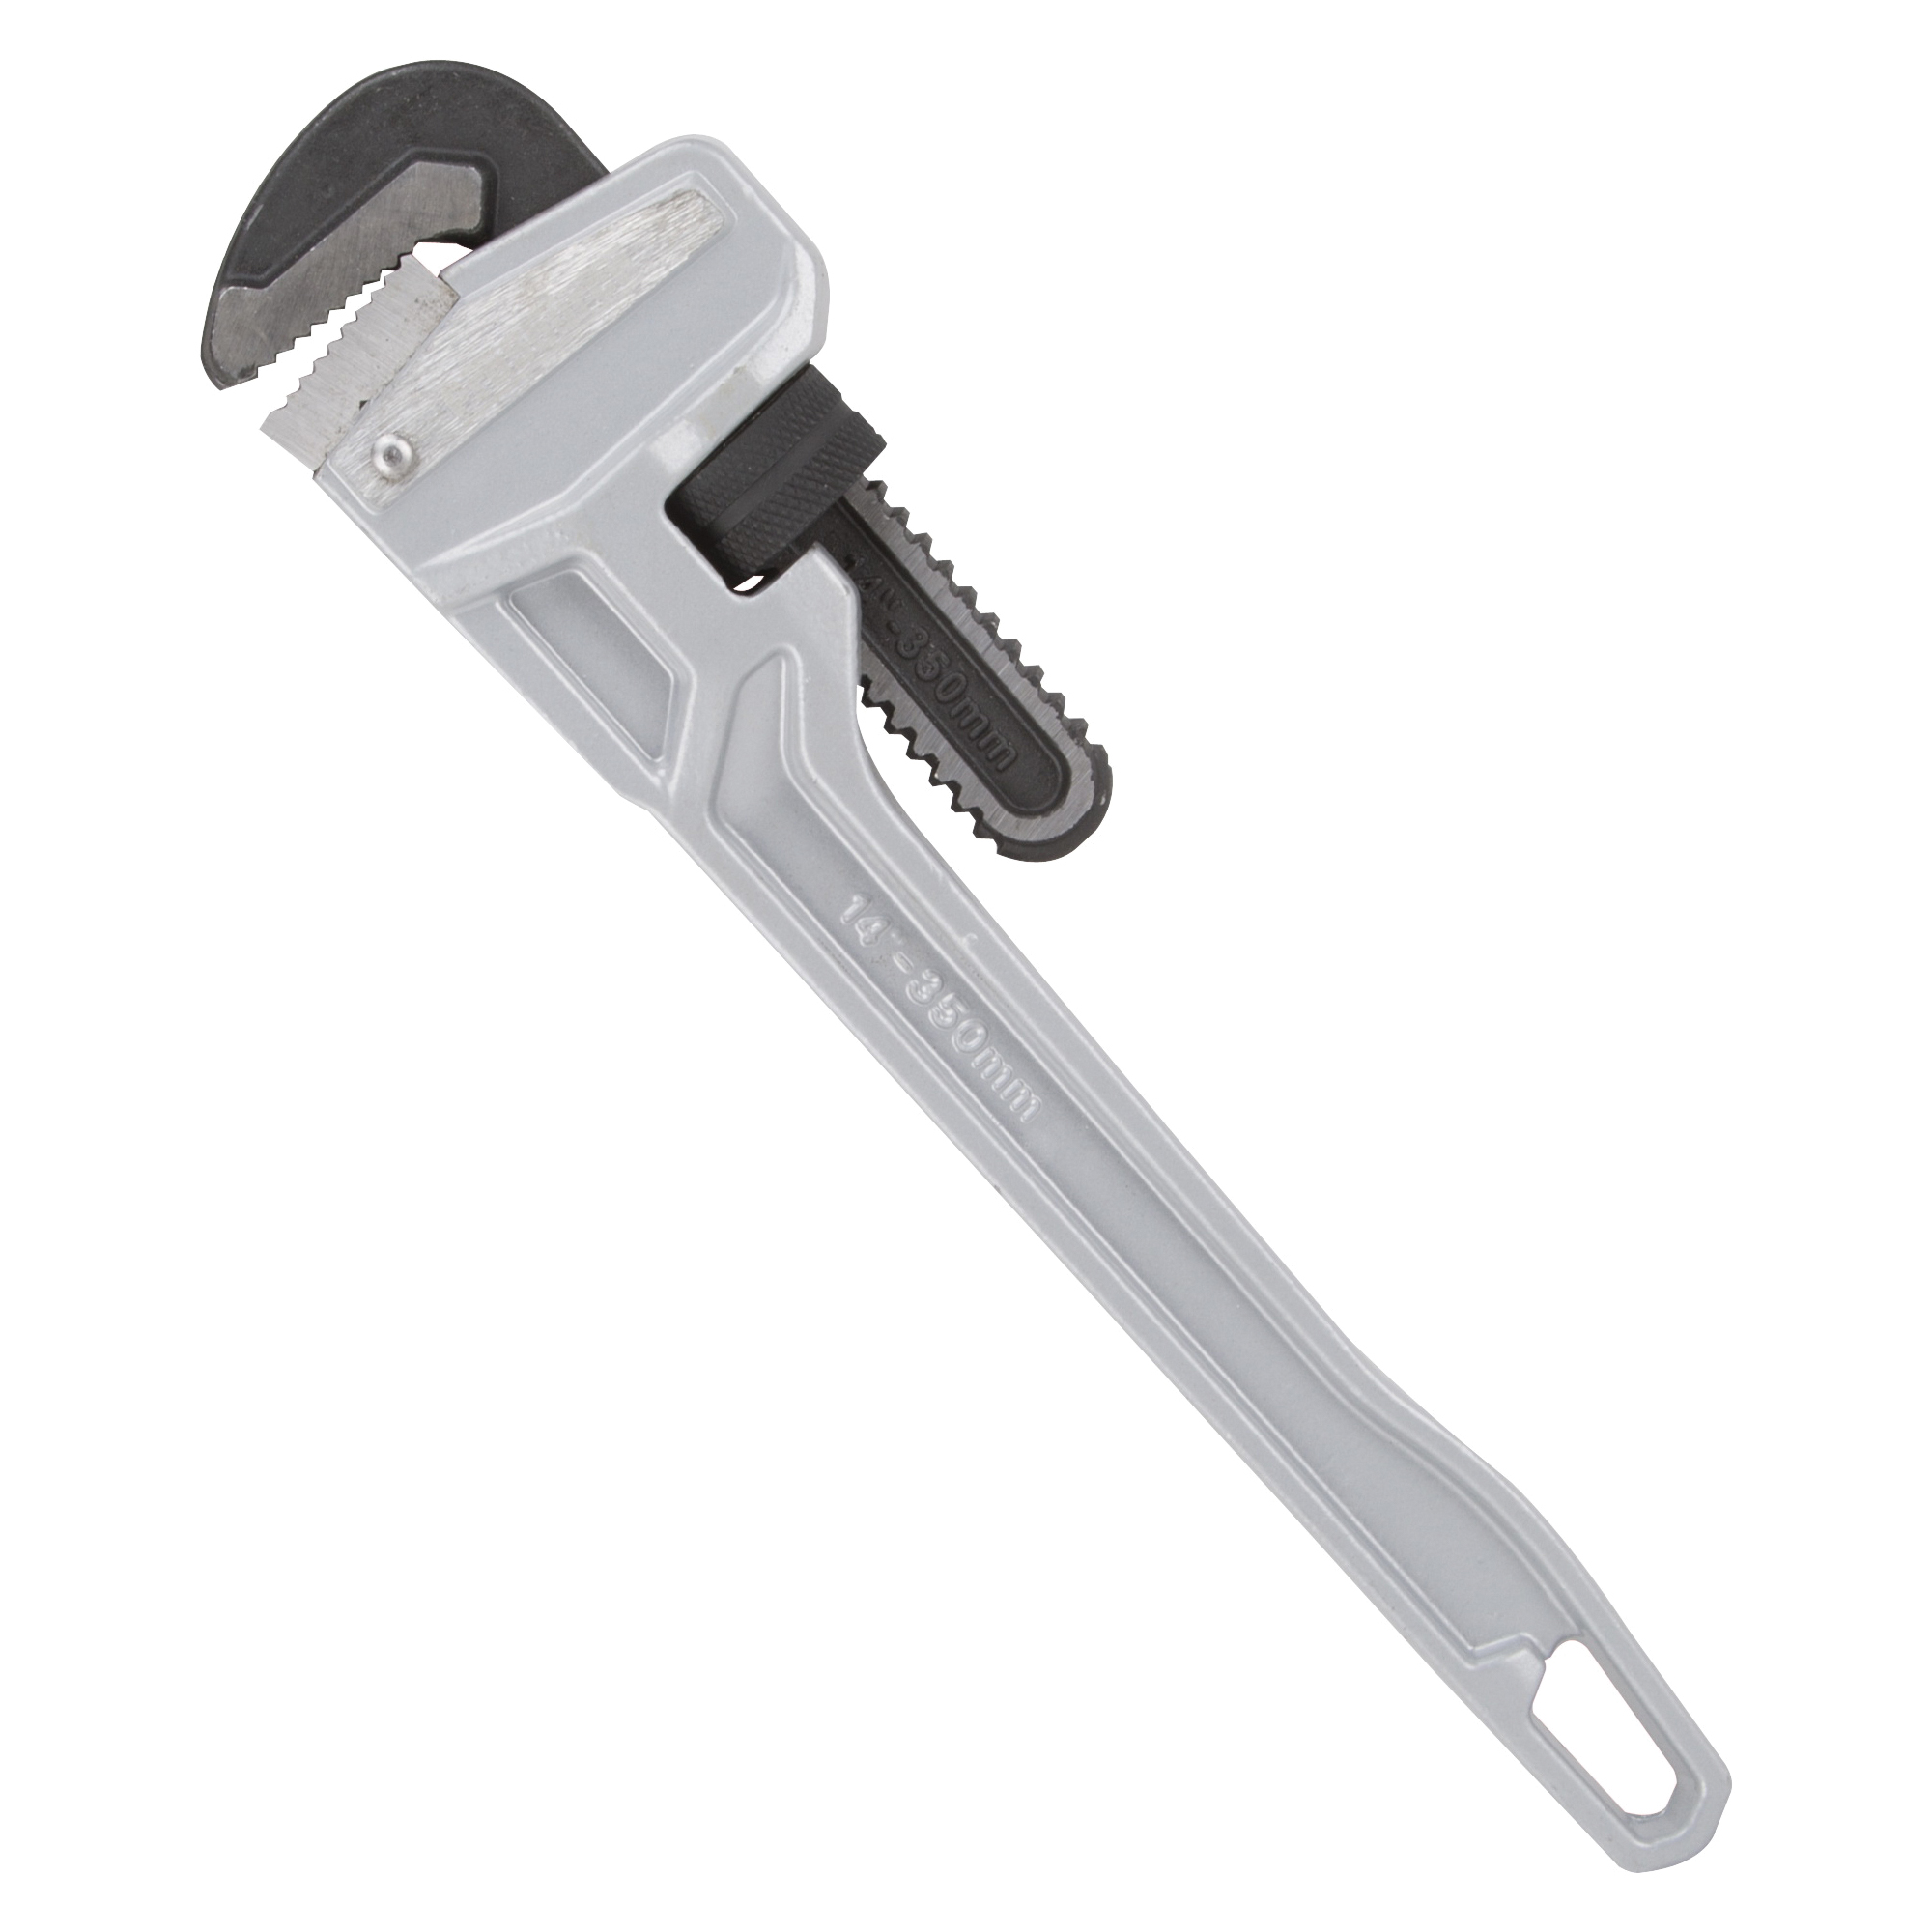 JL40140 Pipe Wrench, 38 mm Jaw, 14 in L, Serrated Jaw, Aluminum, Powder-Coated, Heavy-Duty Handle